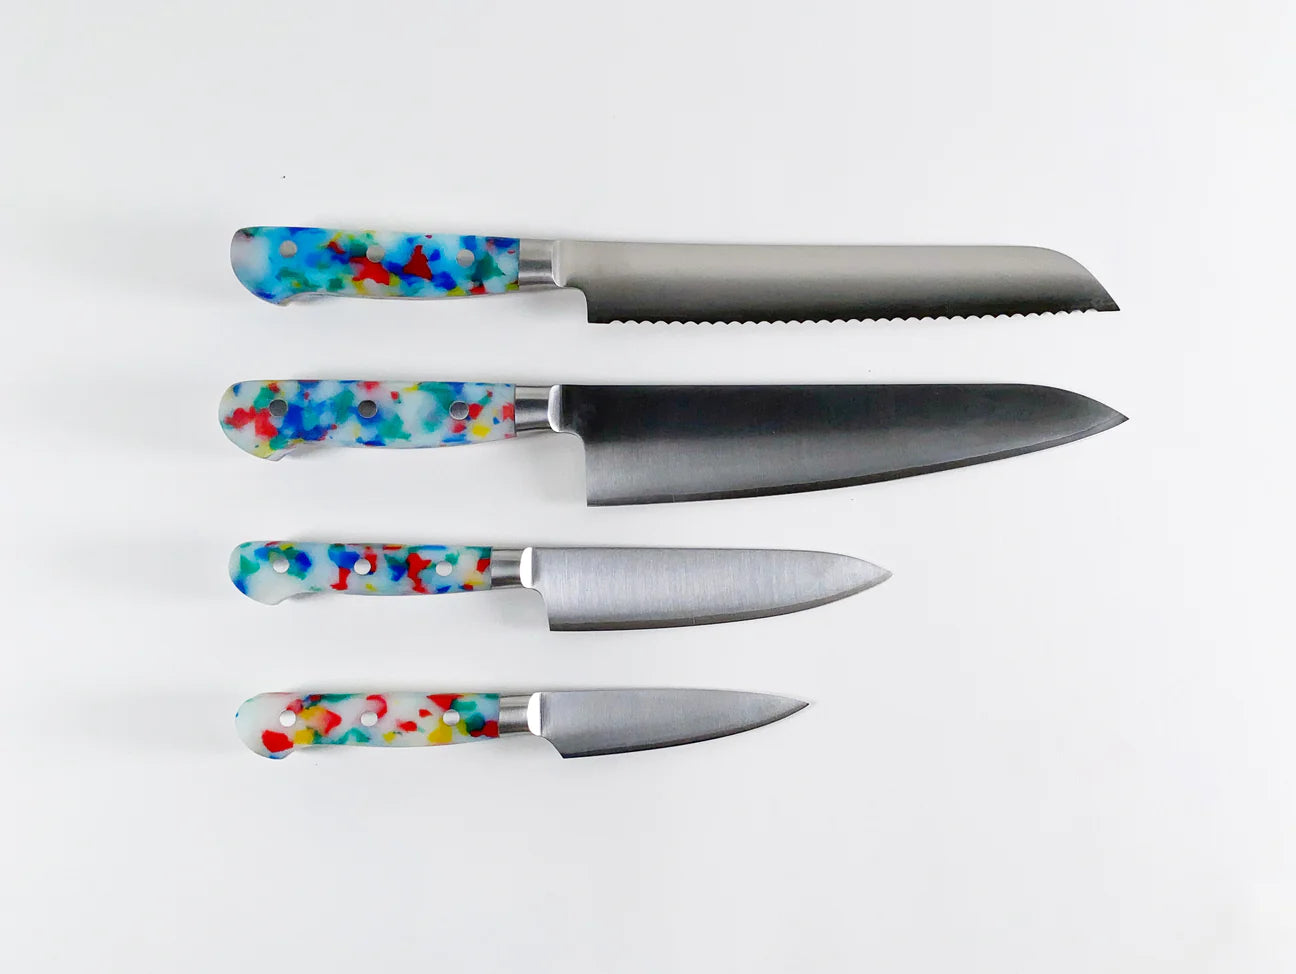 4 different knives with a multi colored handle -- mostly white with blue, yellow and red specks